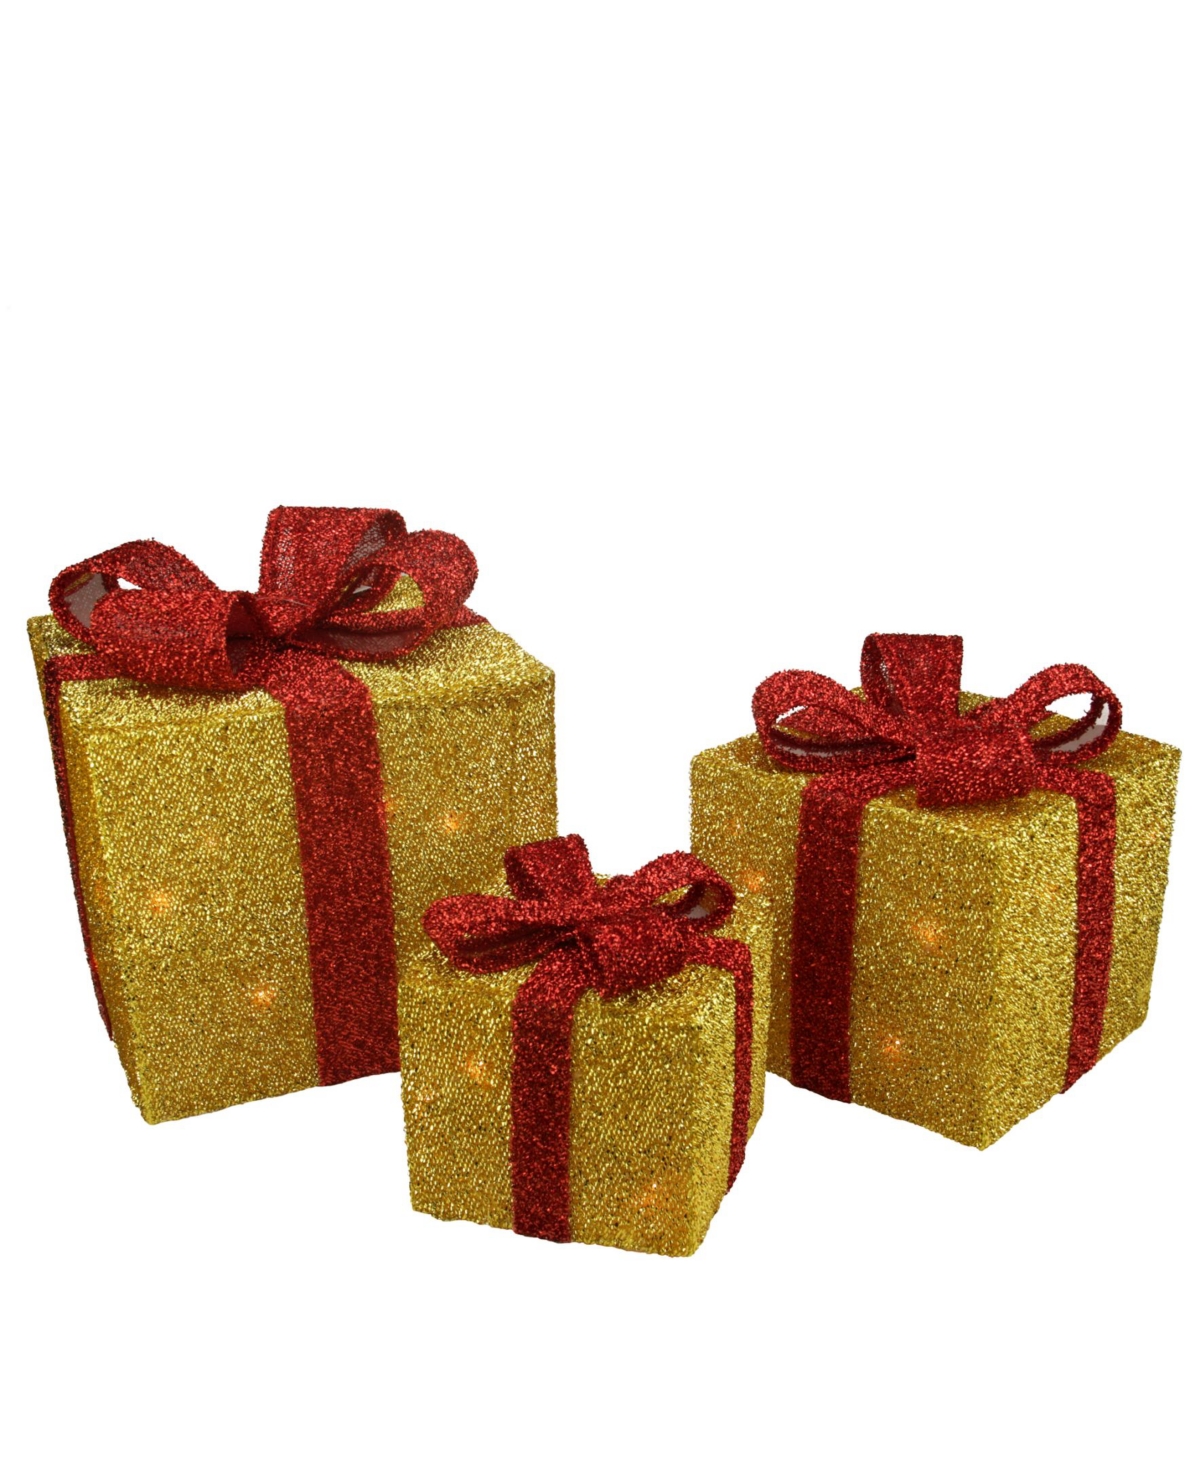 Gi Boxes with Bows Lighted Christmas Outdoor Decorations - Gold